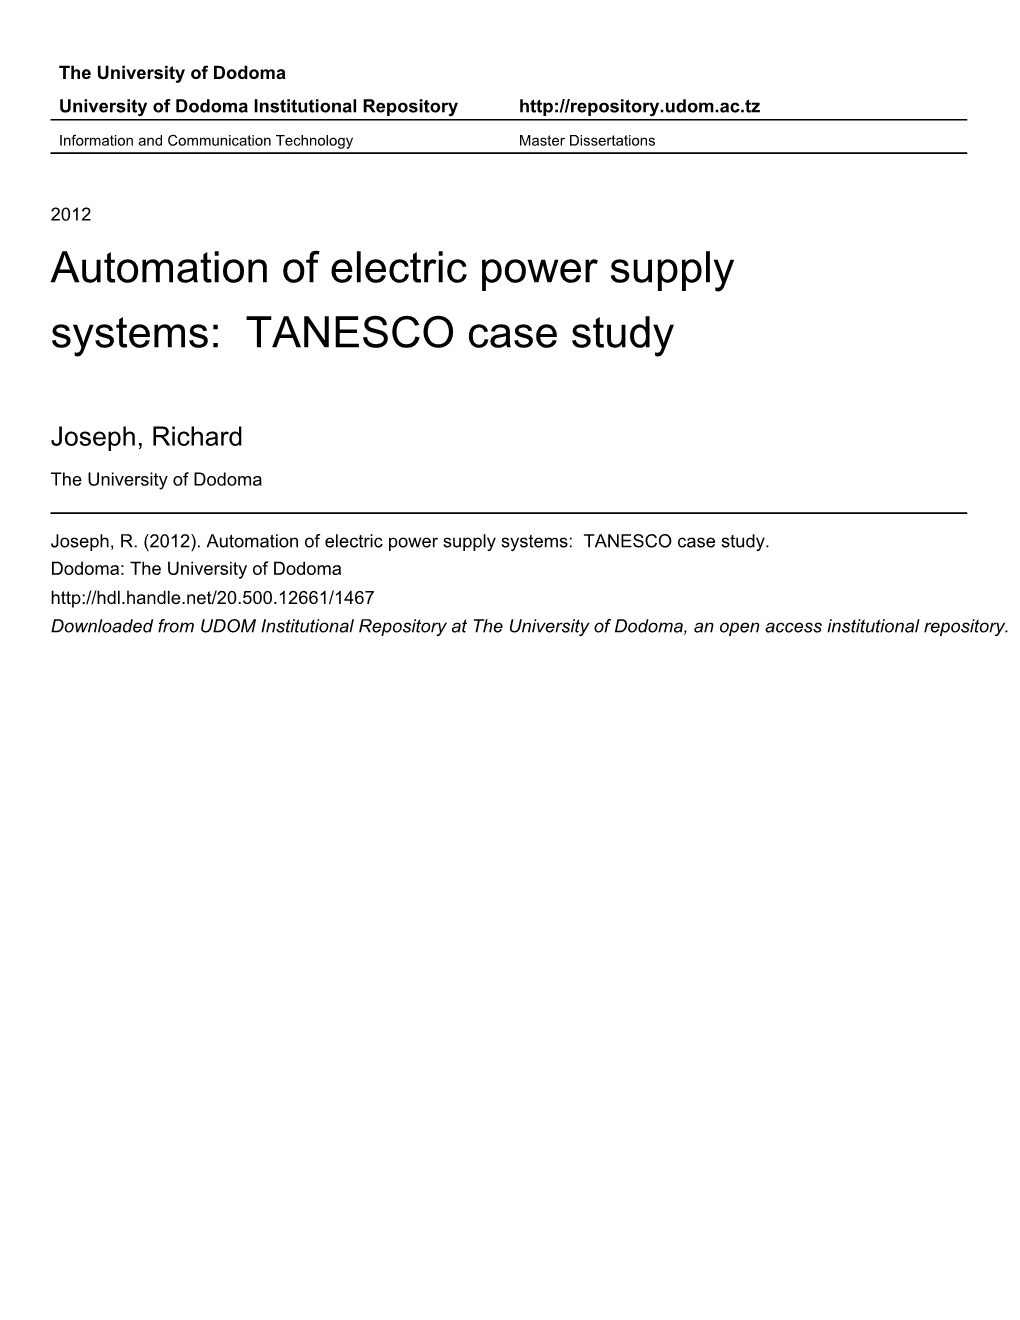 Automation of Electric Power Supply Systems: TANESCO Case Study